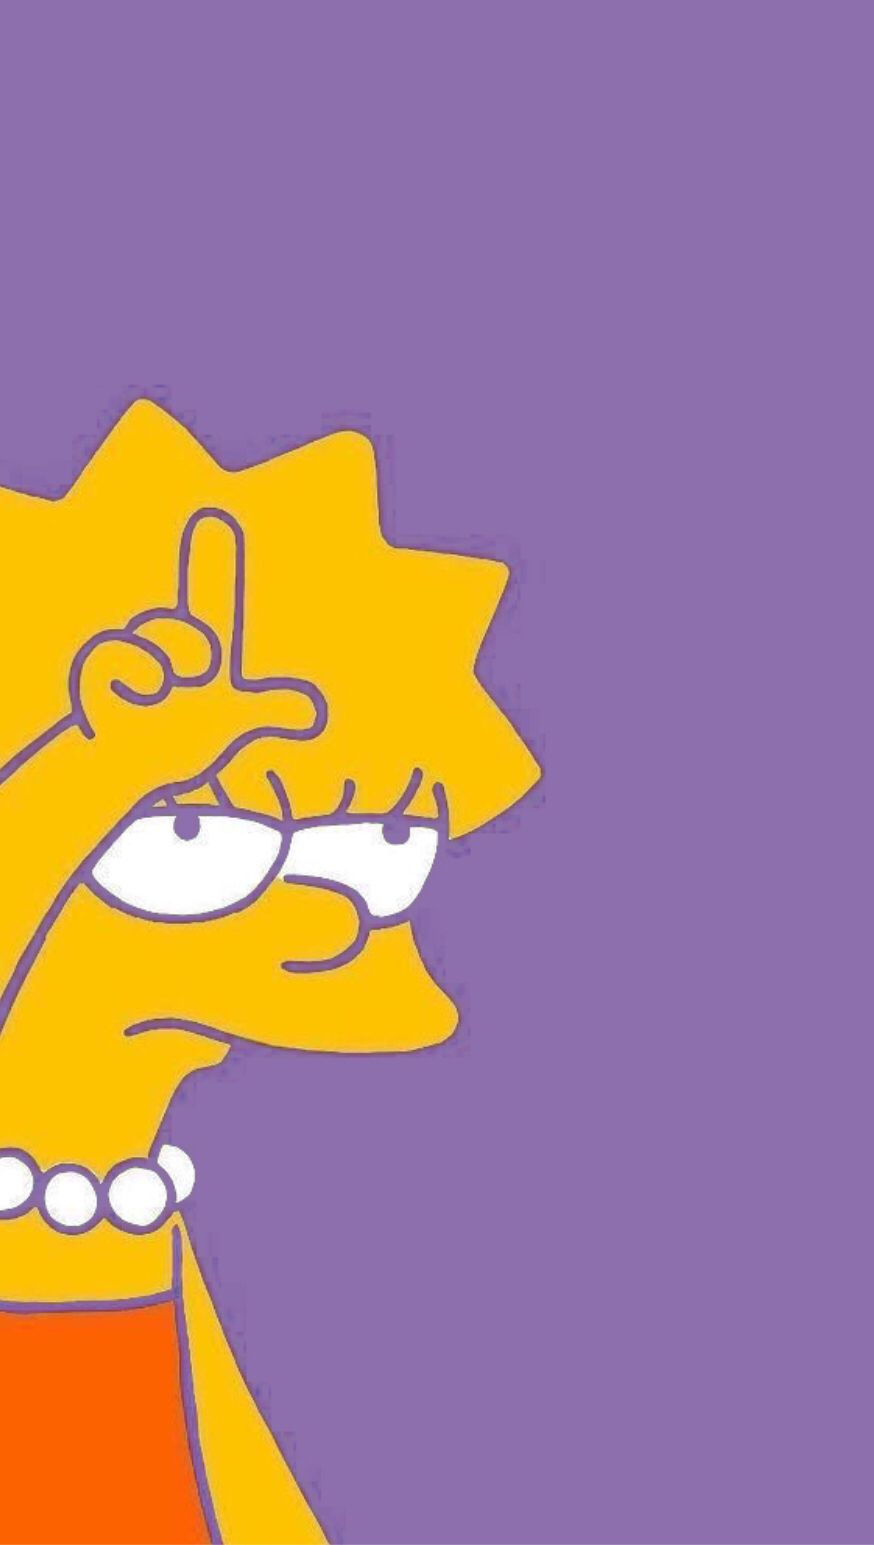 Lisa Simpson iPhone Wallpaper with high-resolution 1080x1920 pixel. You can use this wallpaper for your iPhone 5, 6, 7, 8, X, XS, XR backgrounds, Mobile Screensaver, or iPad Lock Screen - The Simpsons, Lisa Simpson